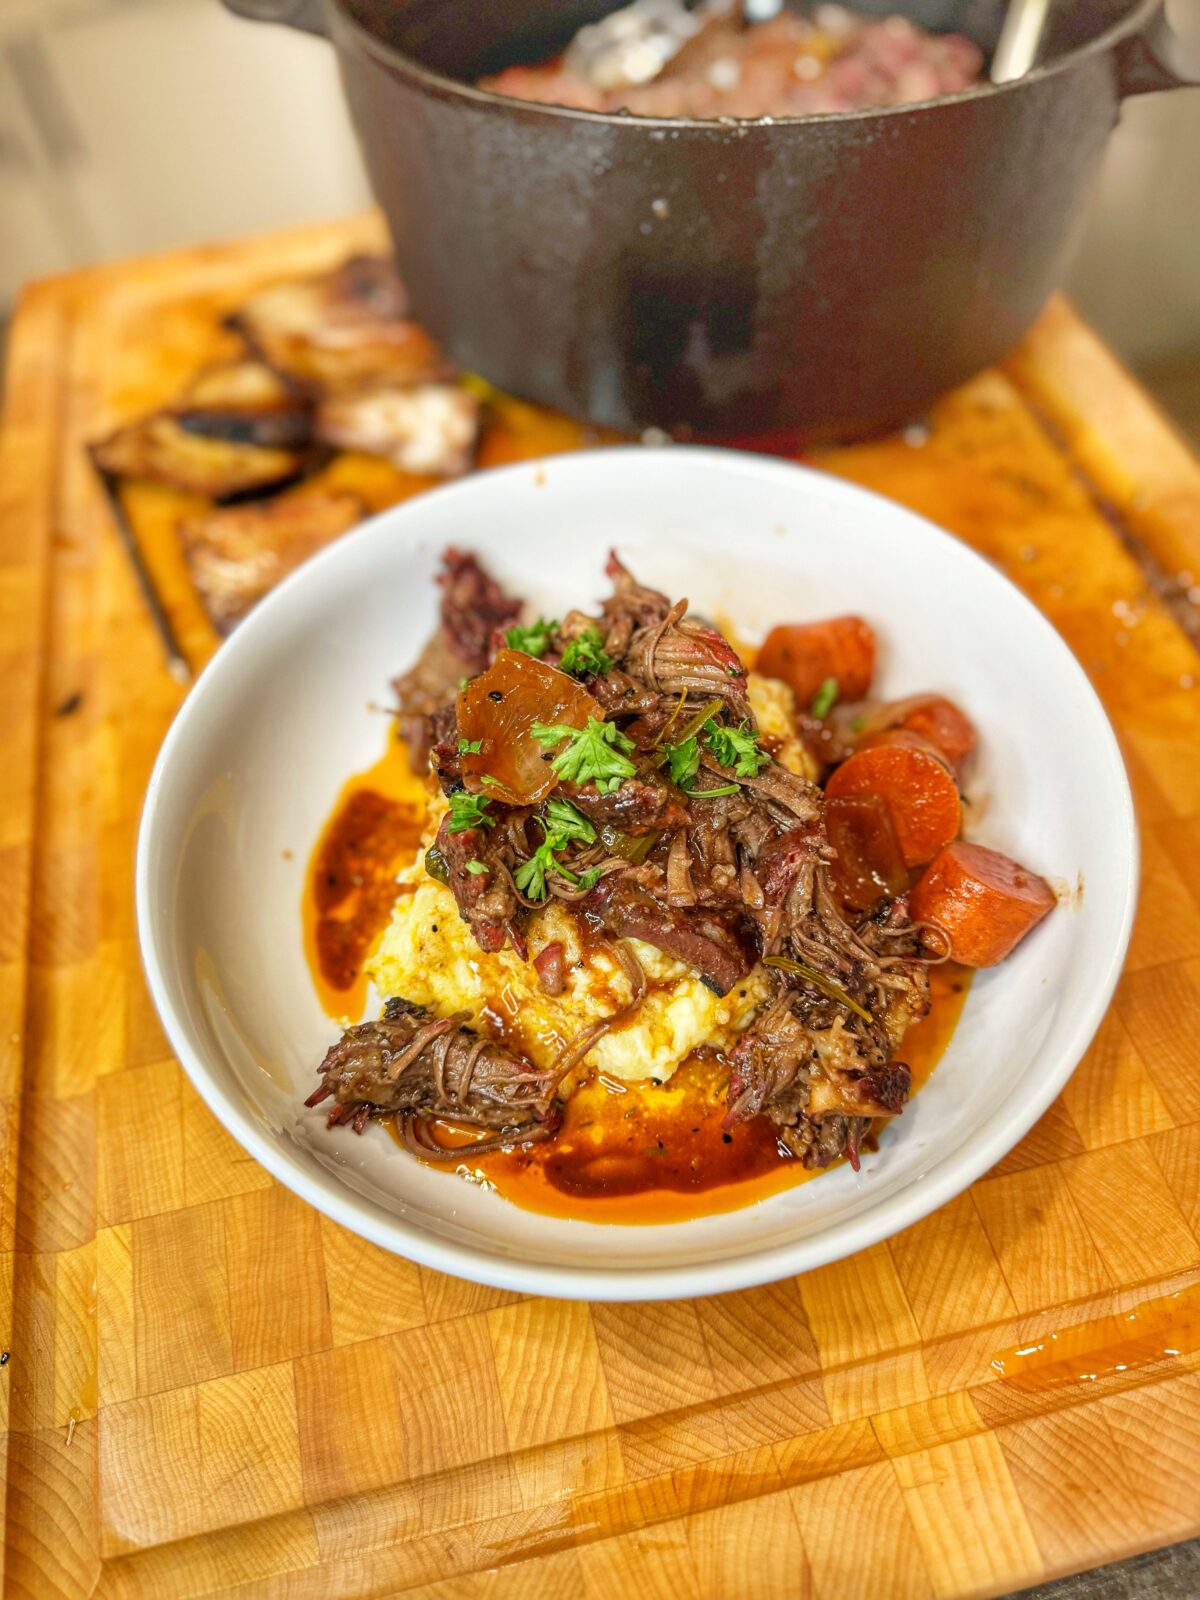 A bowl of red wine braised short ribs over mashed potatoes.